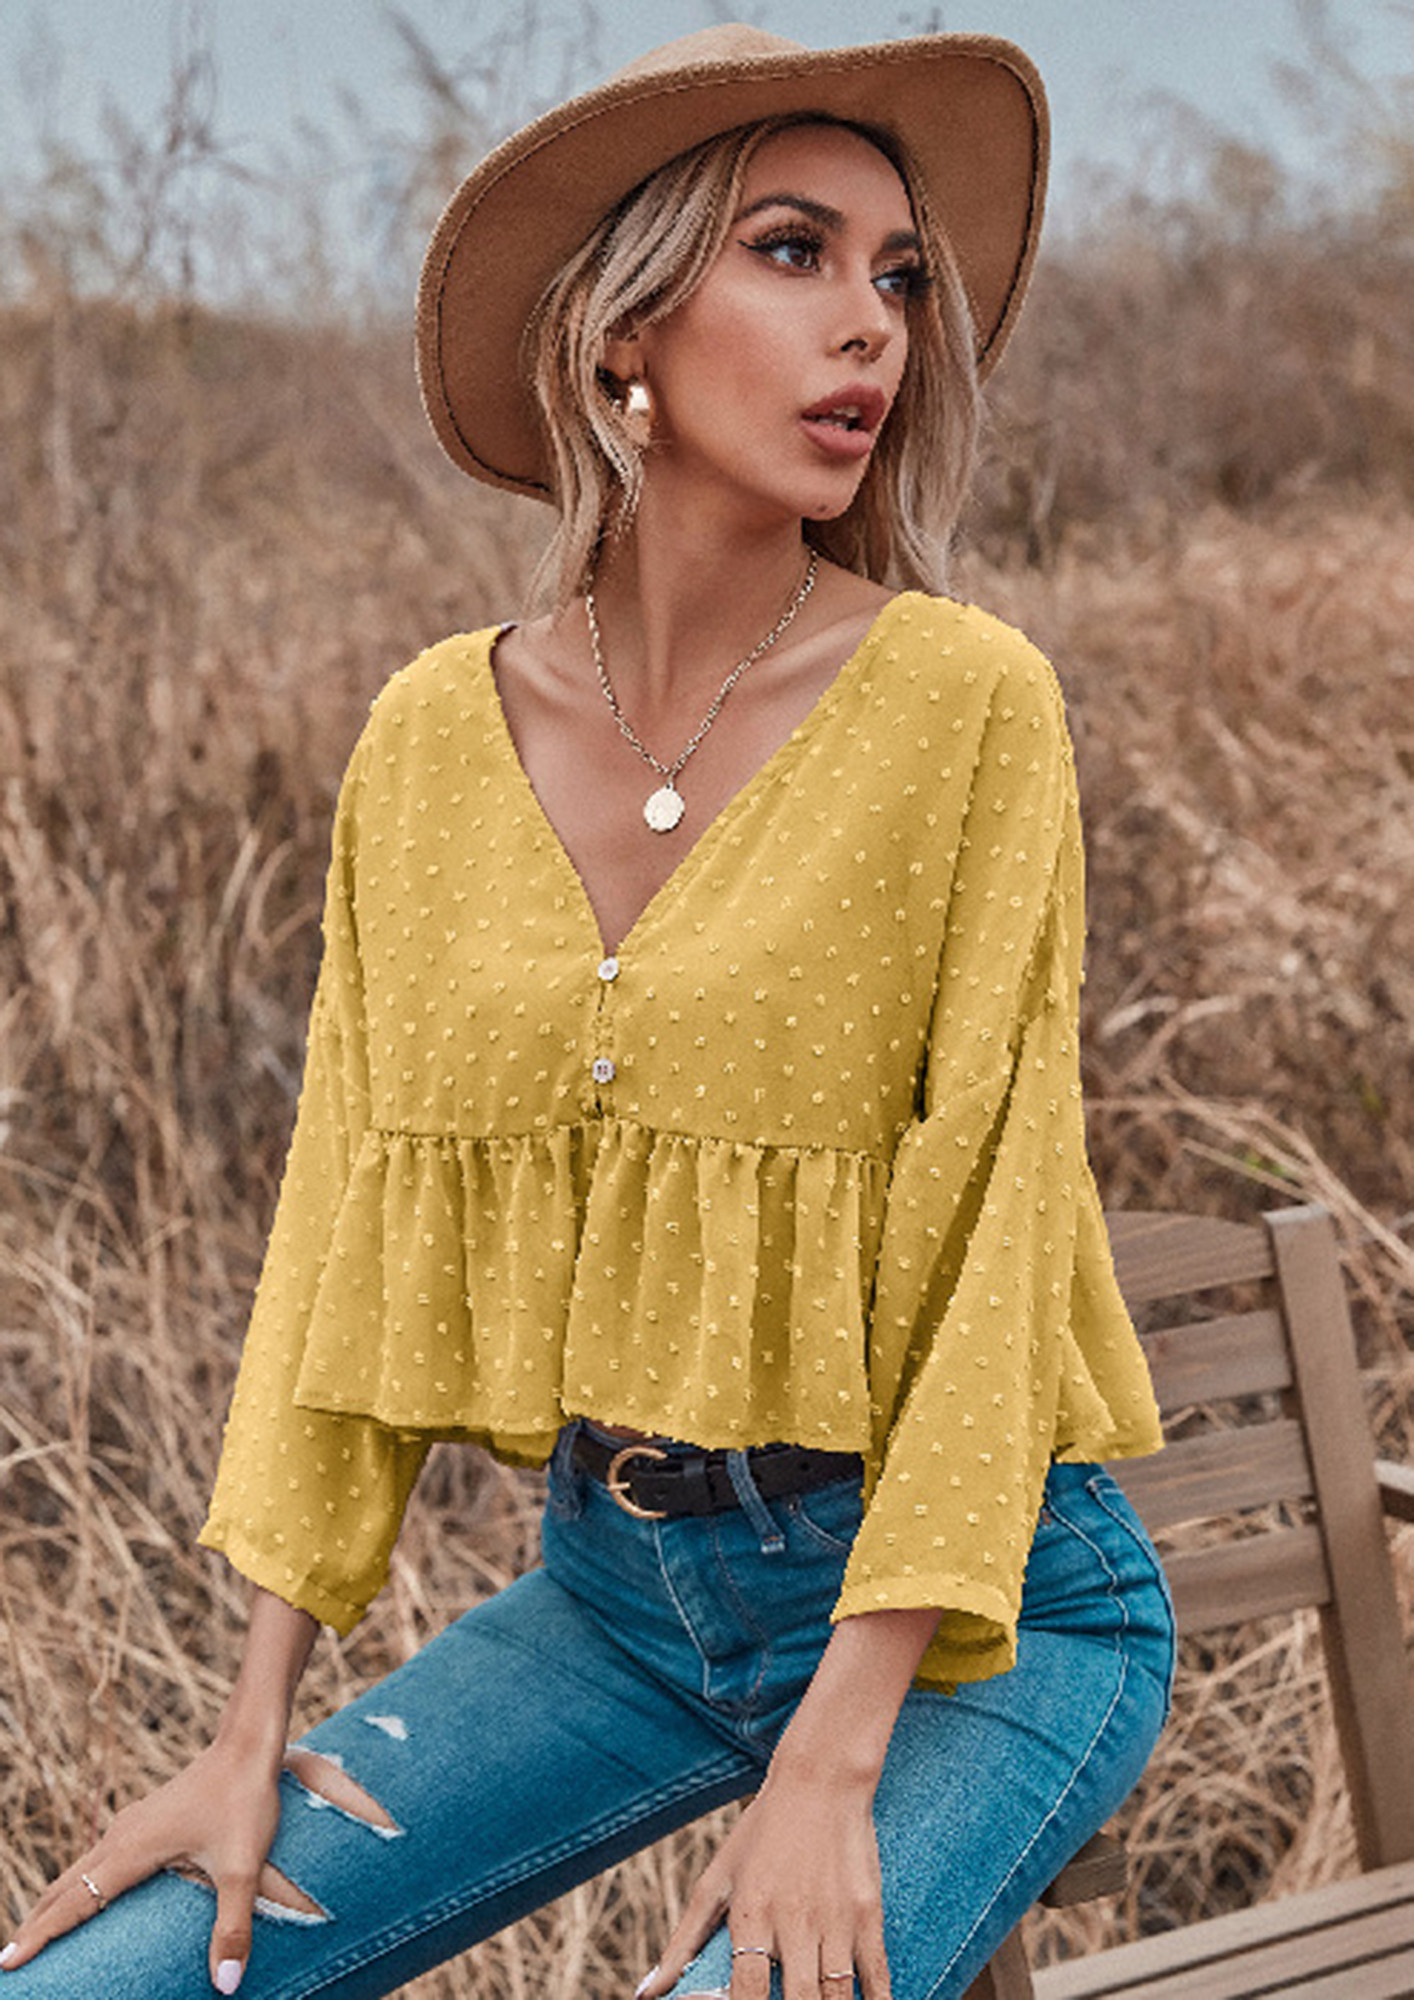 Beneath-My-Feelings,Three Fourth Sleeves, V-Neck, Swiss Dot Printed, Frill Detail, Yellow Cropped Top